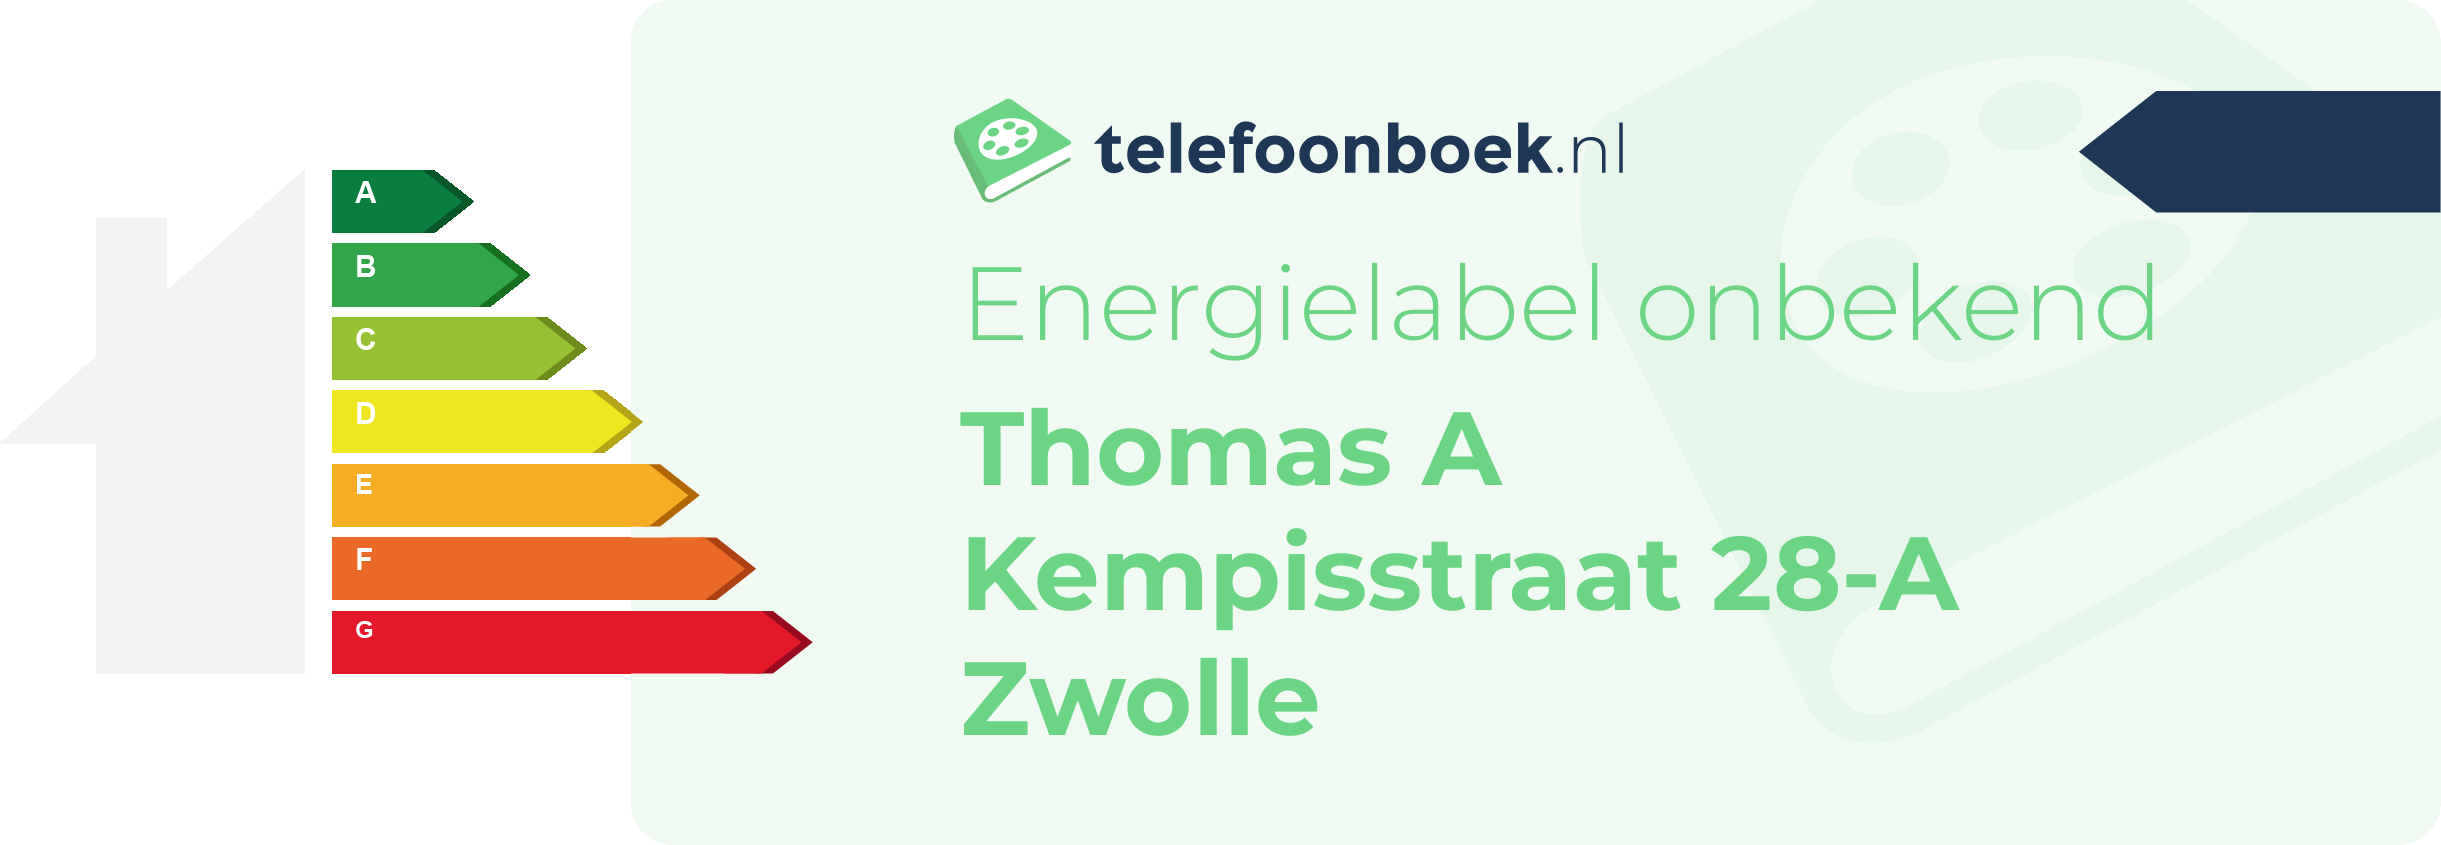 Energielabel Thomas A Kempisstraat 28-A Zwolle